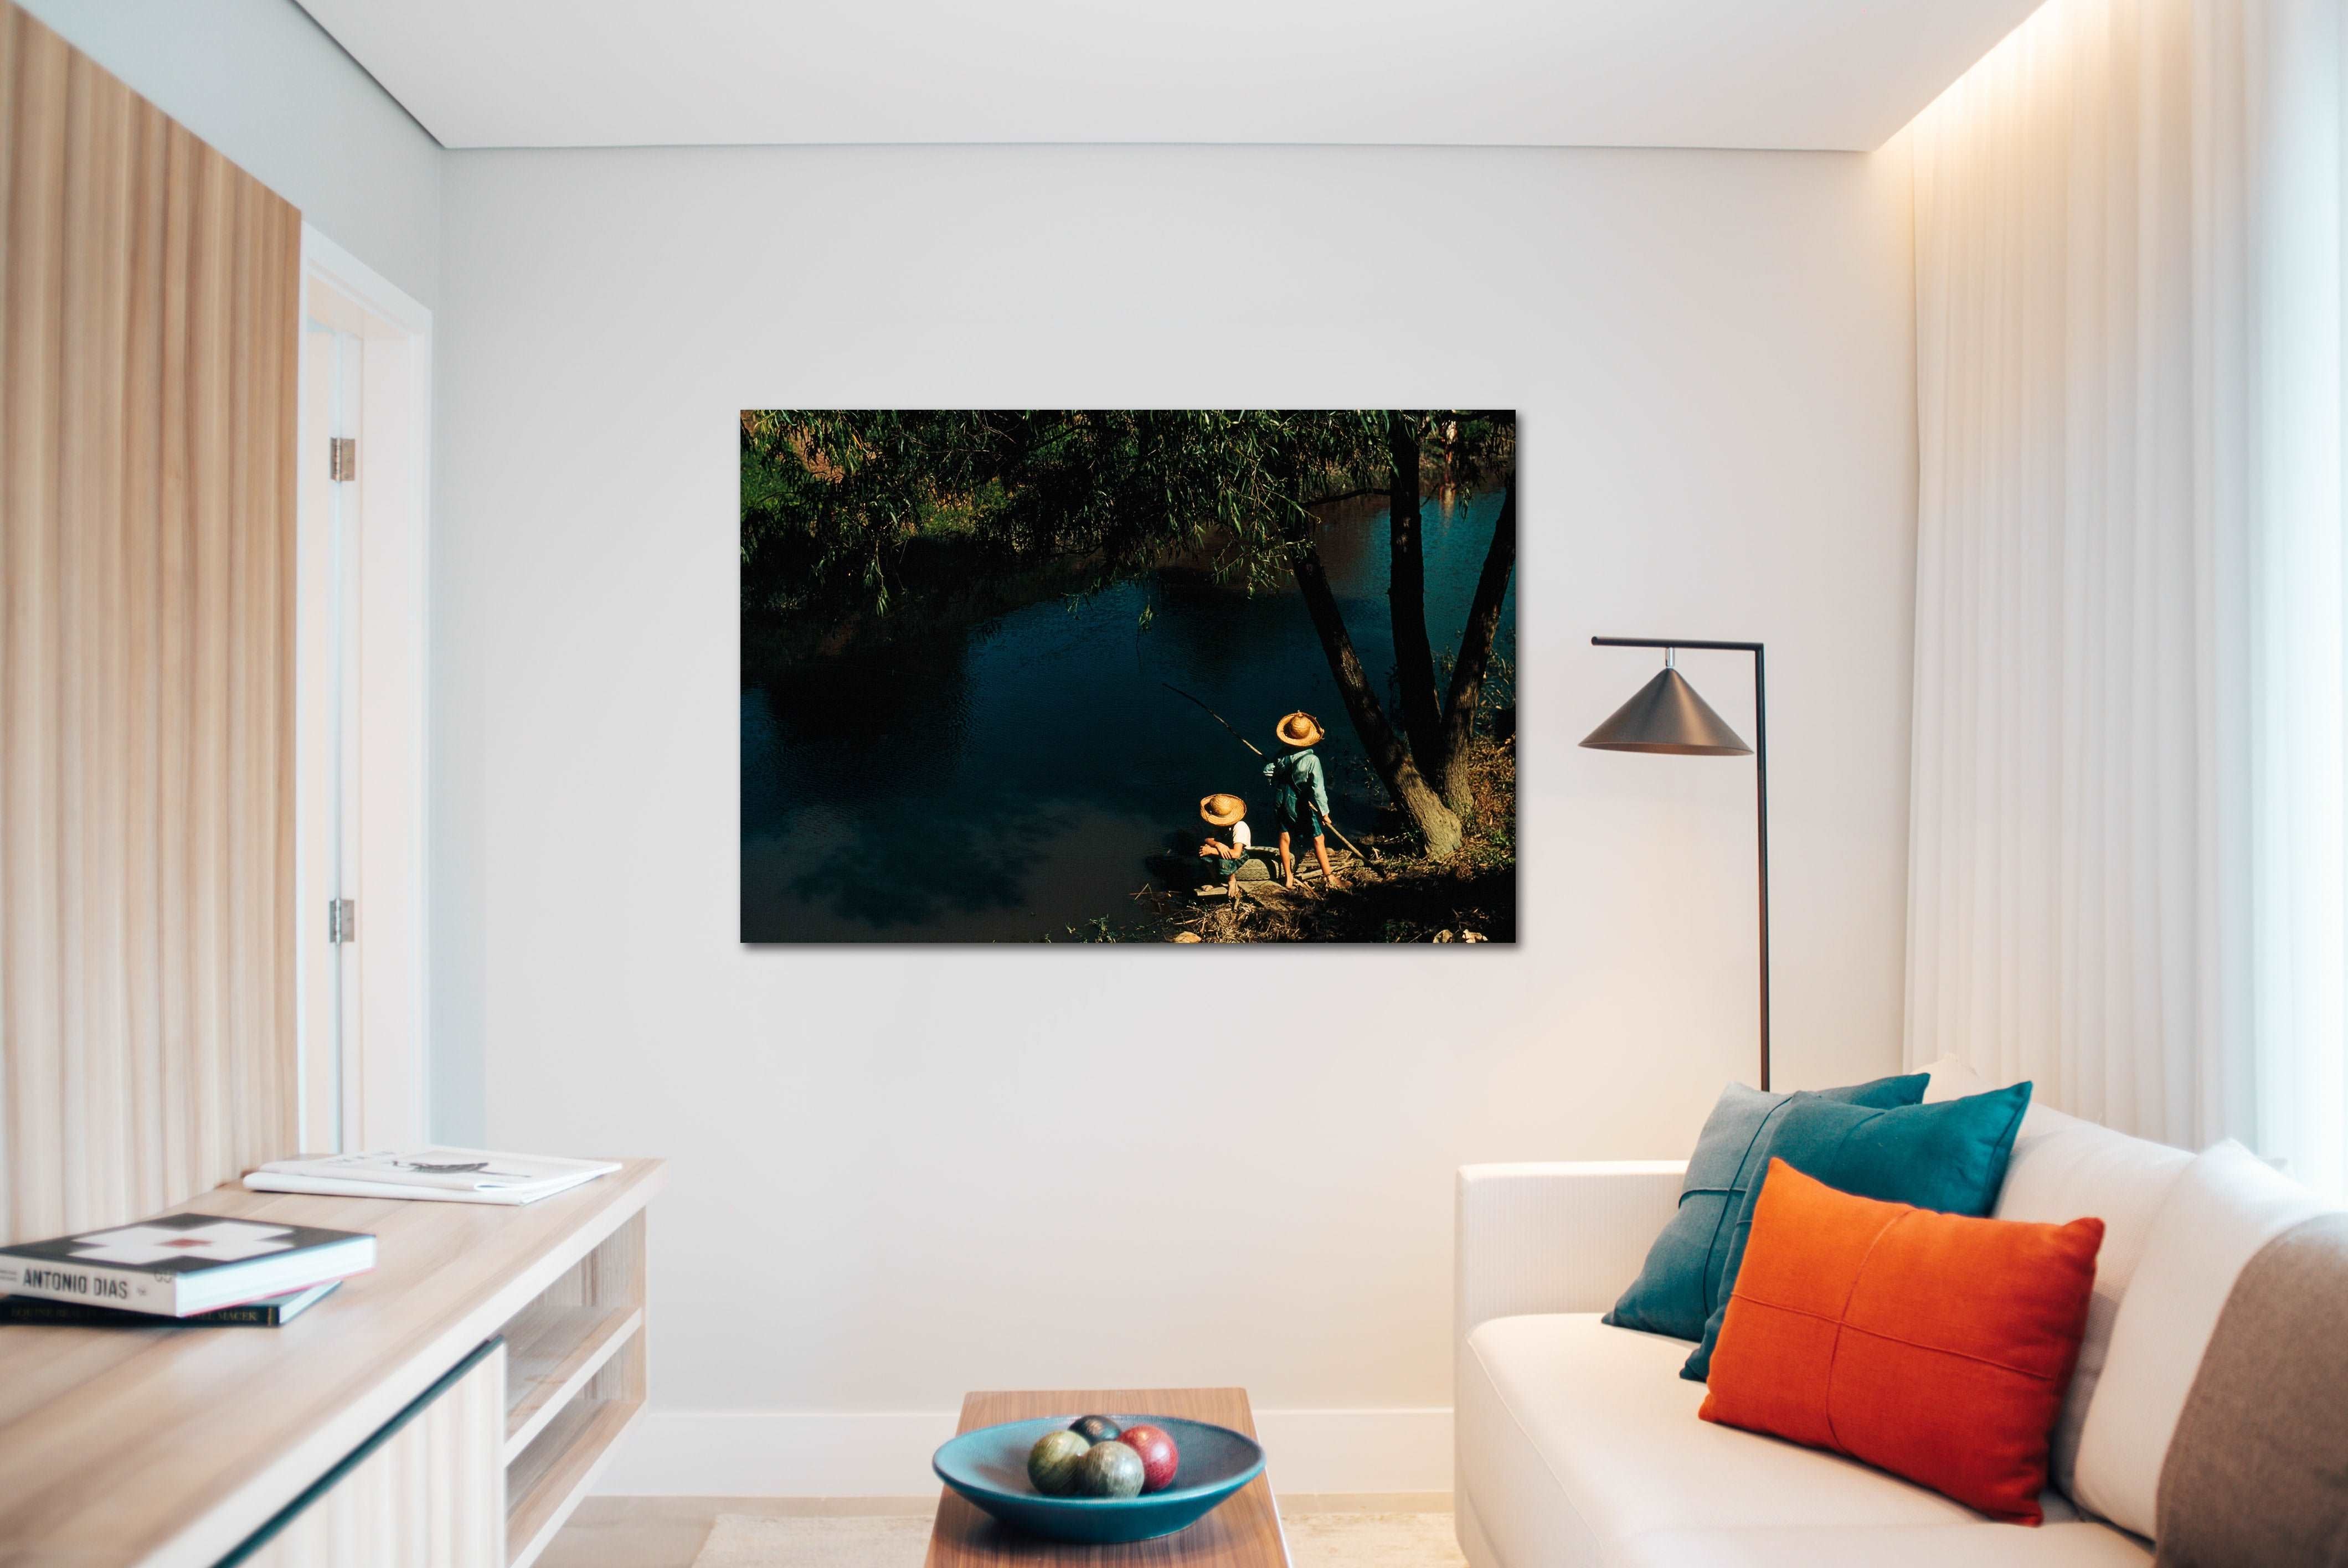 A canvas print of a vintage color photograph hanging on a living room wall